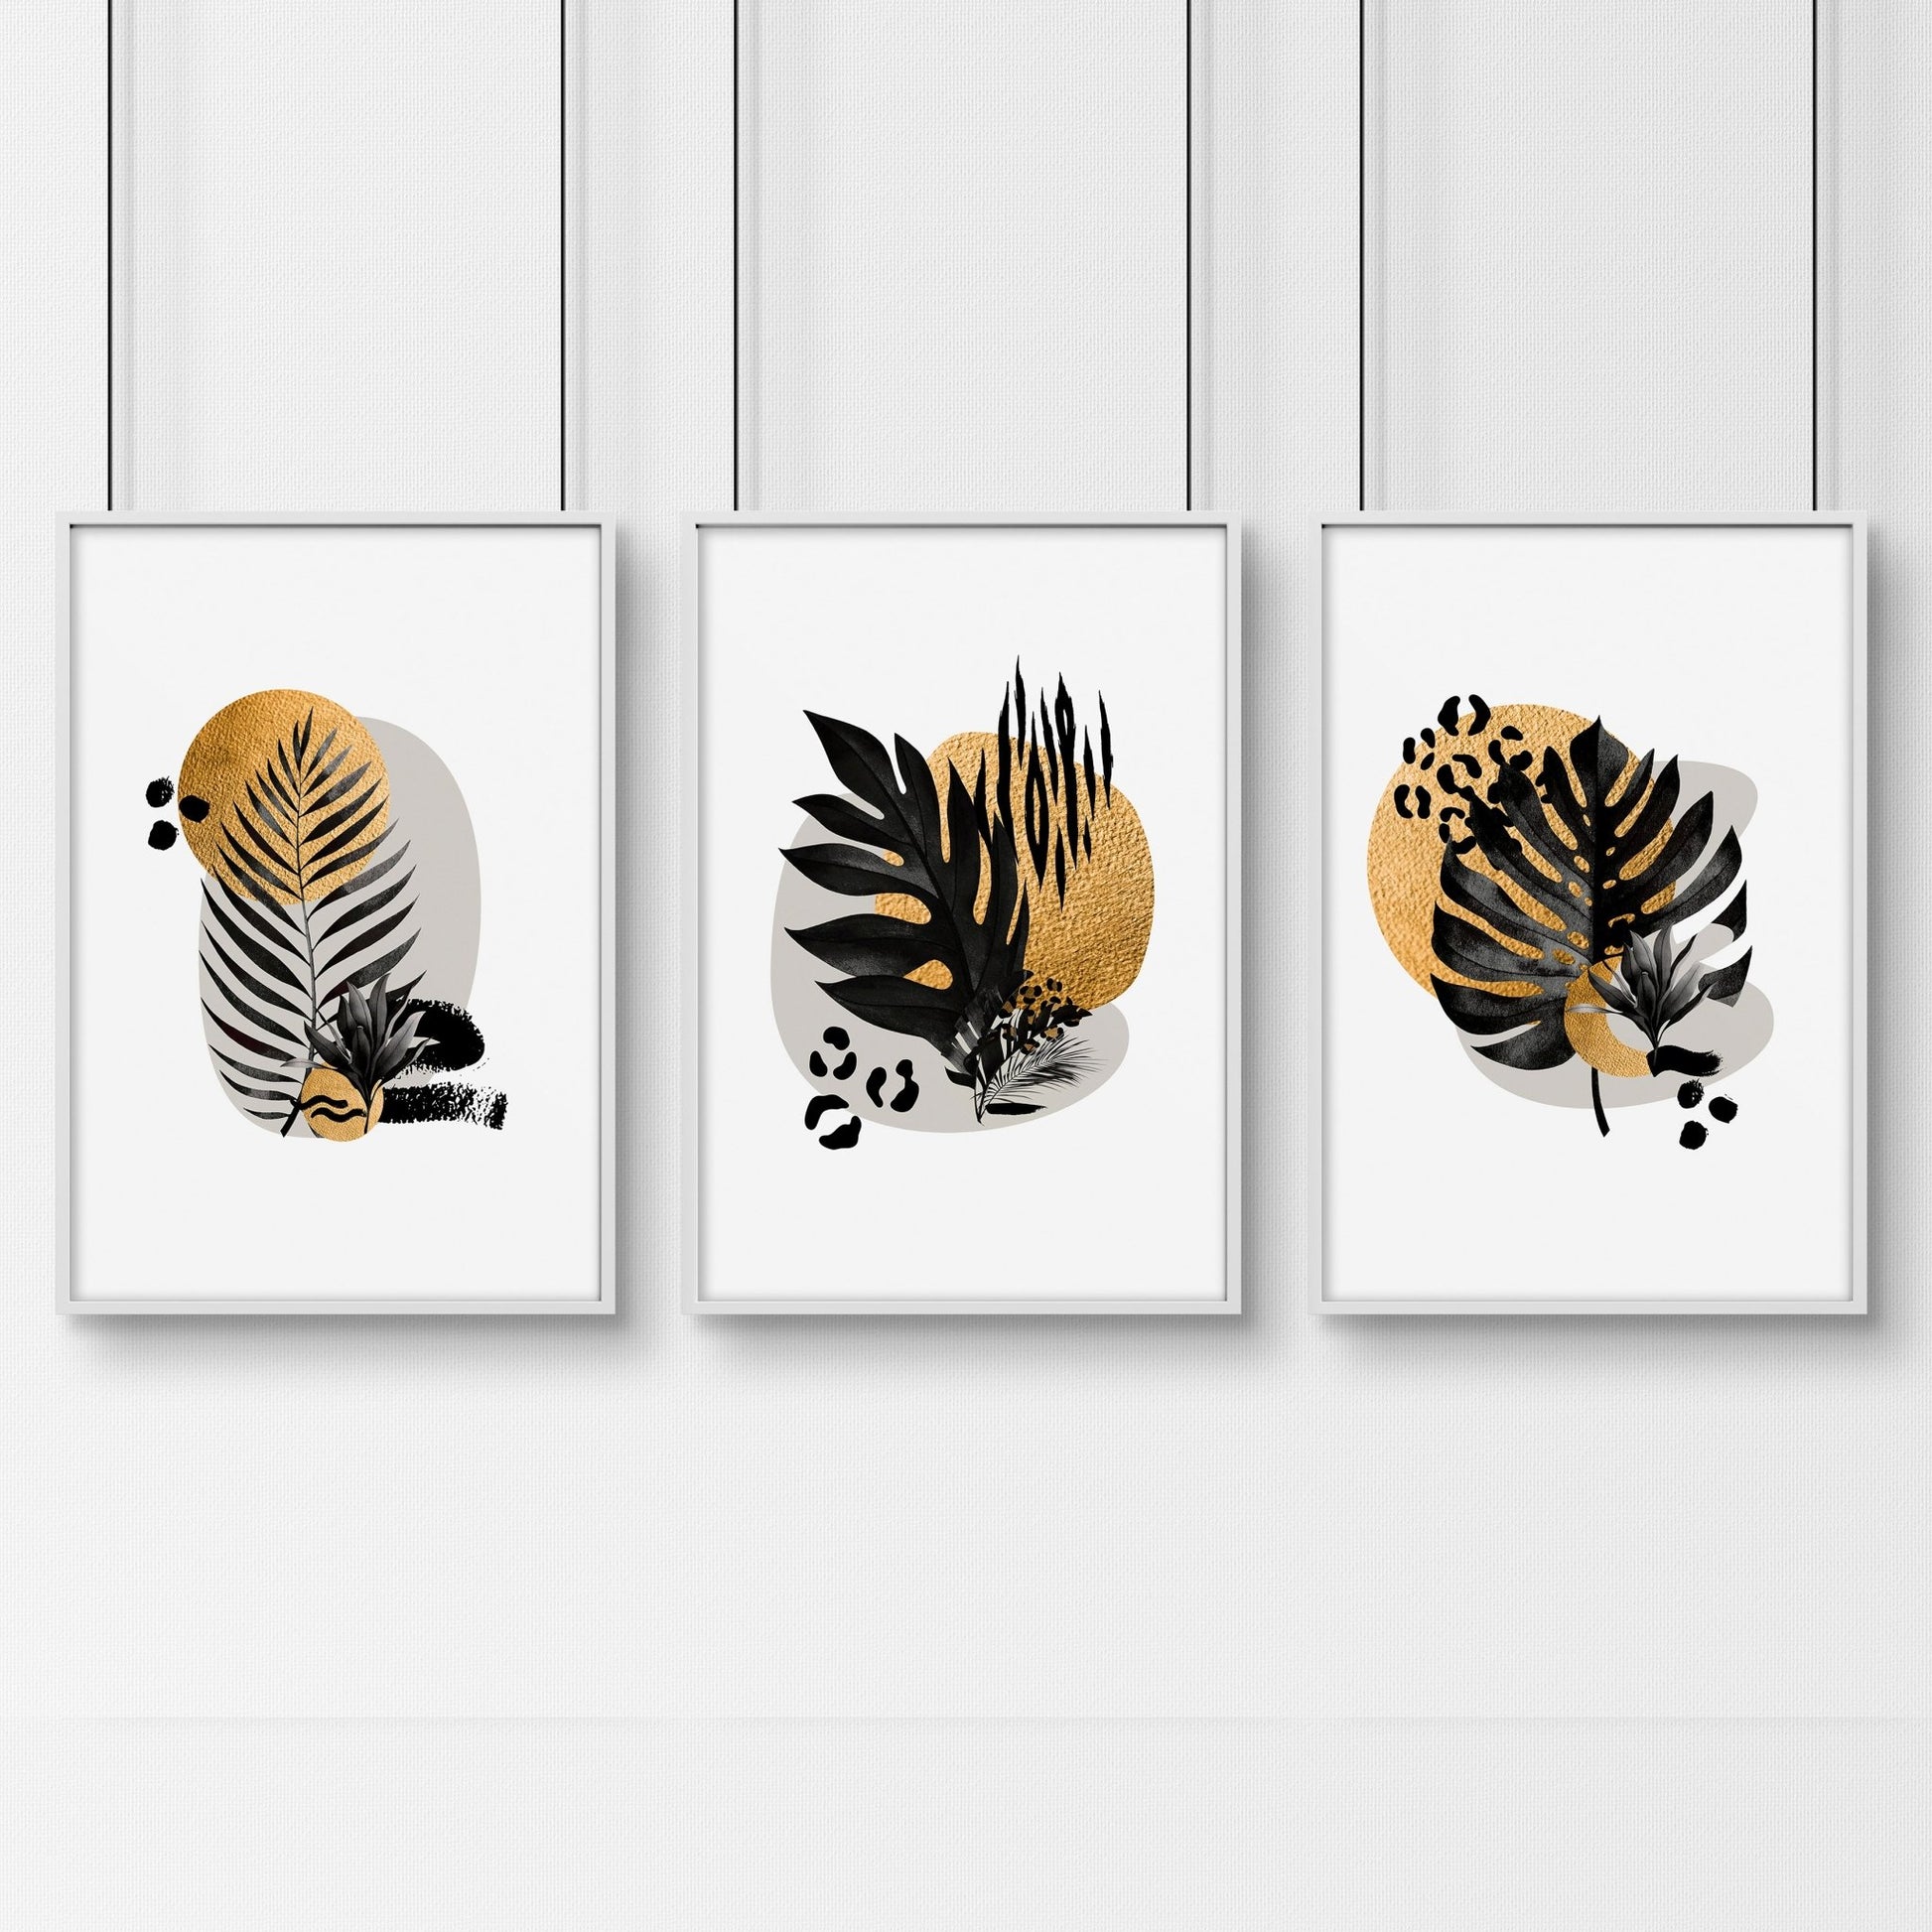 Wall art for a home office | set of 3 Tropical wall art prints